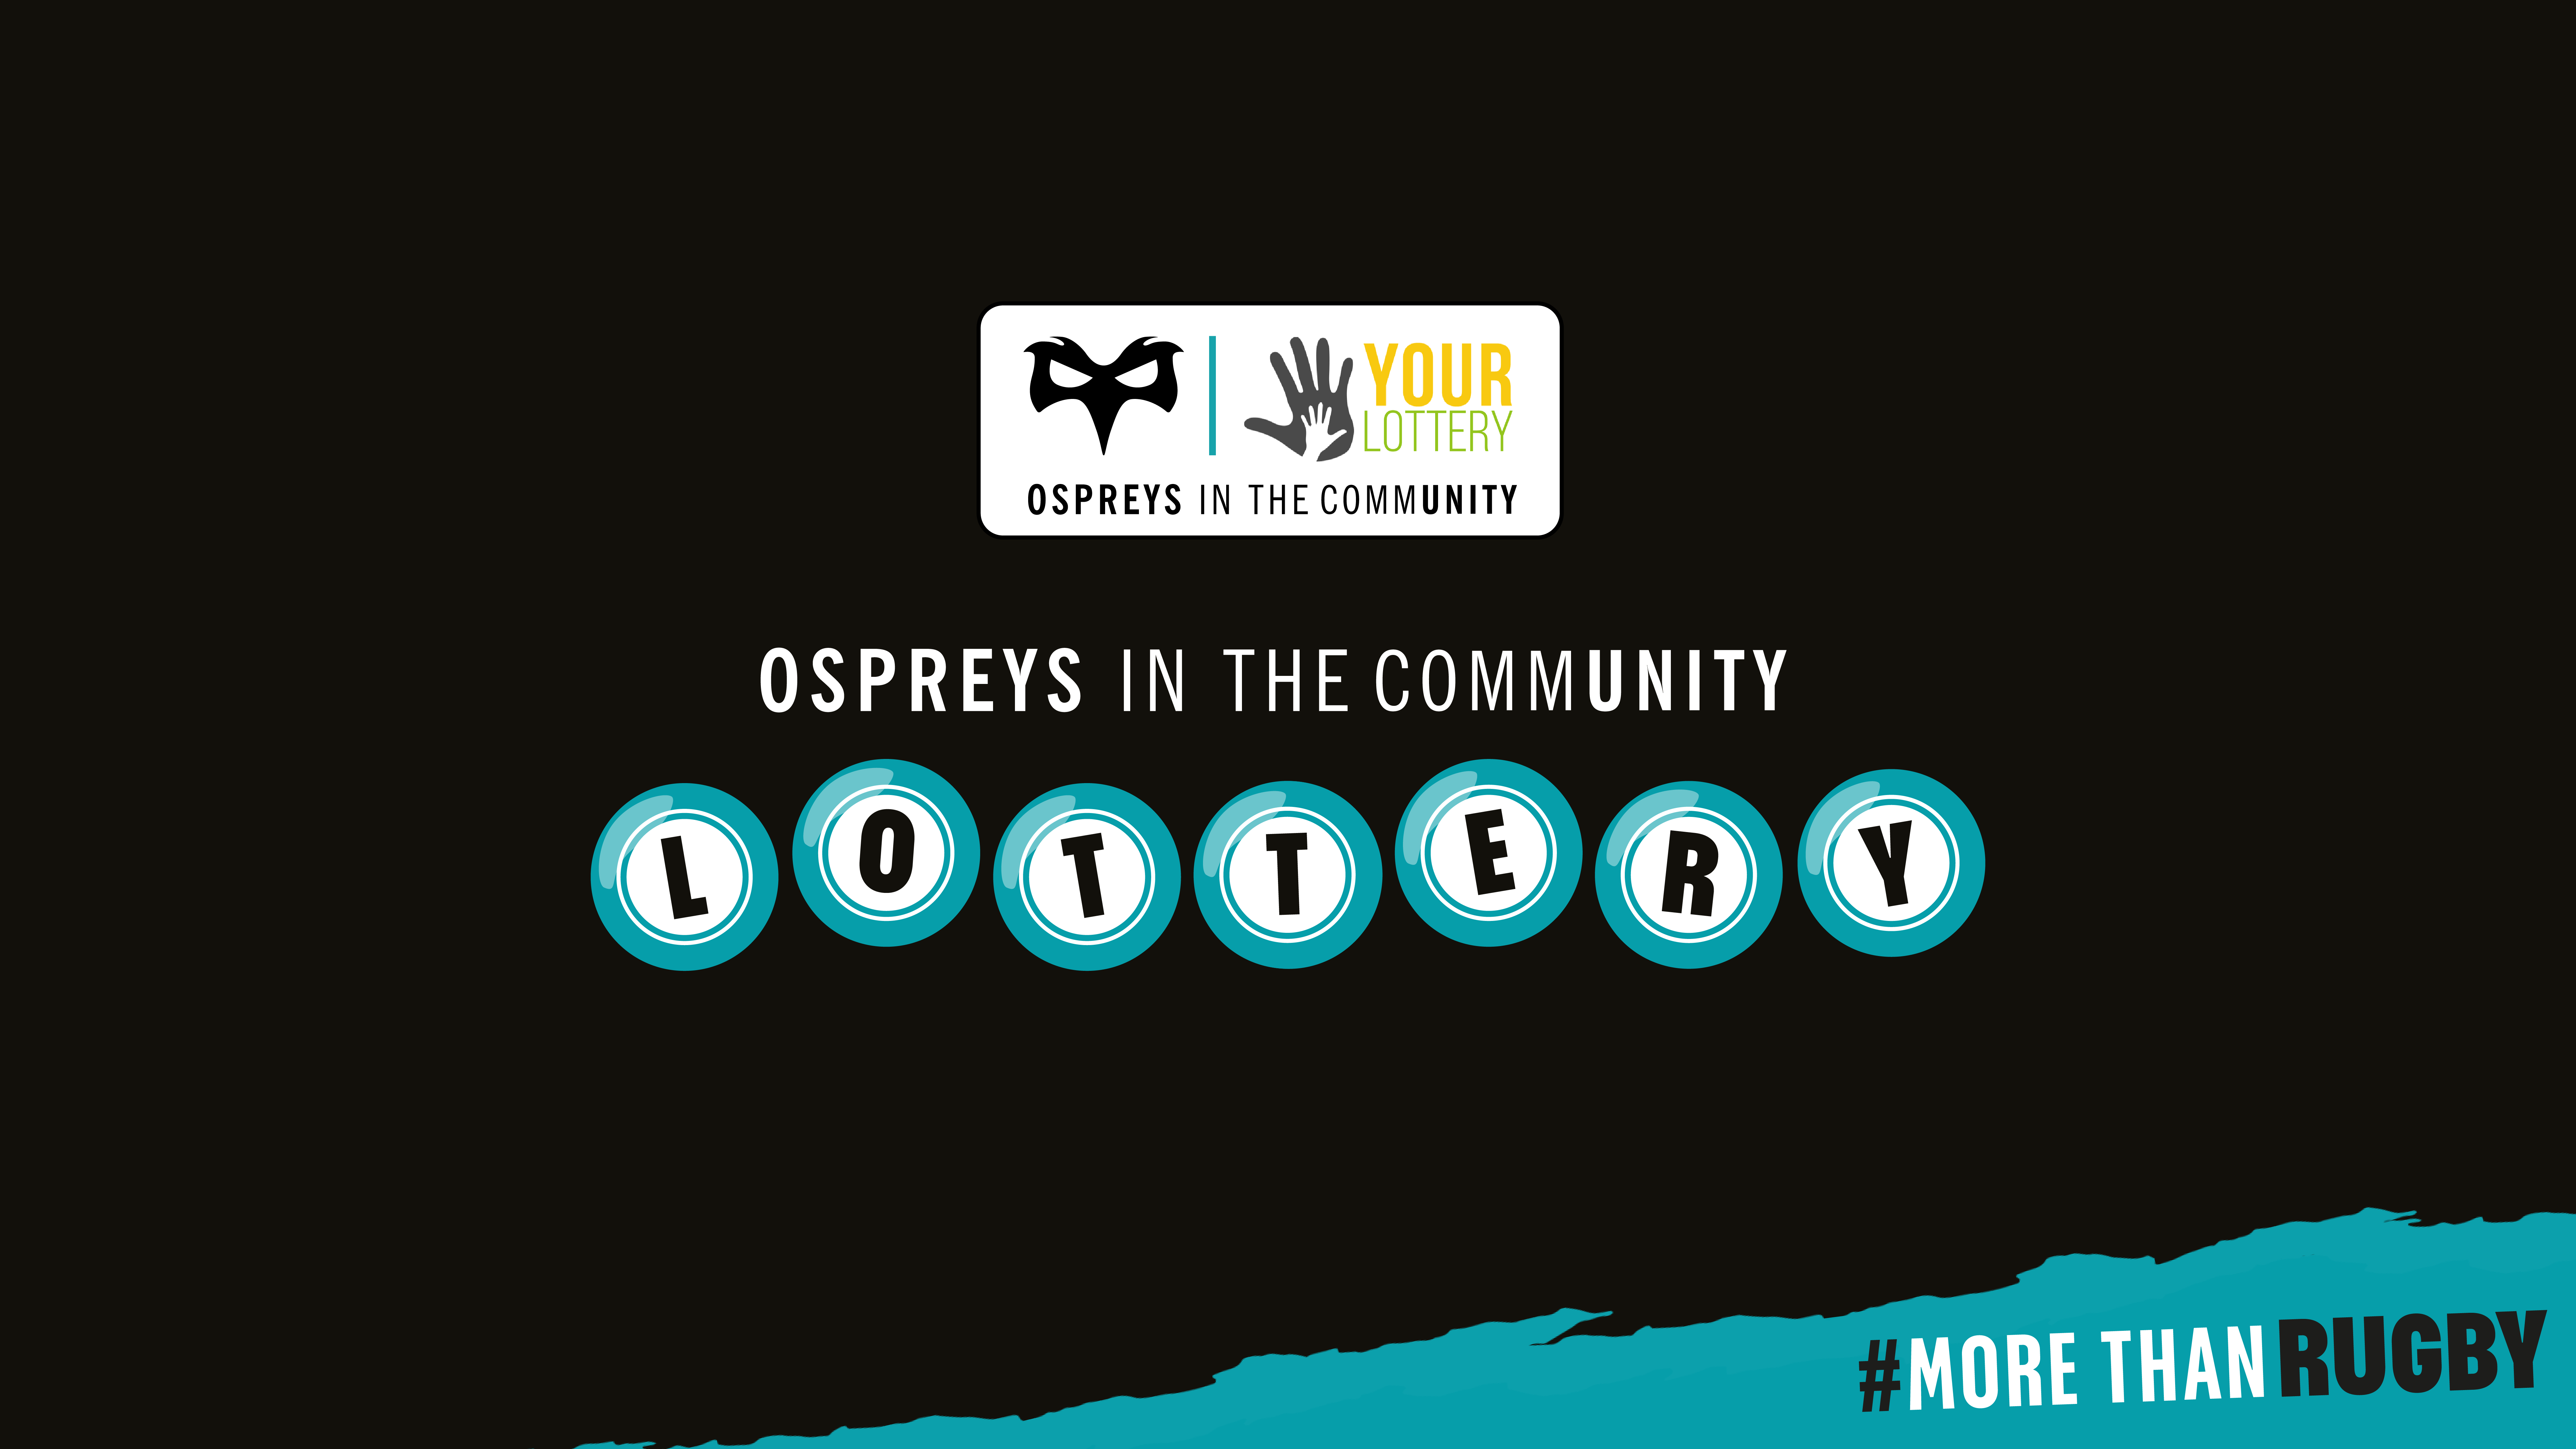 Ospreys in the Community lottery